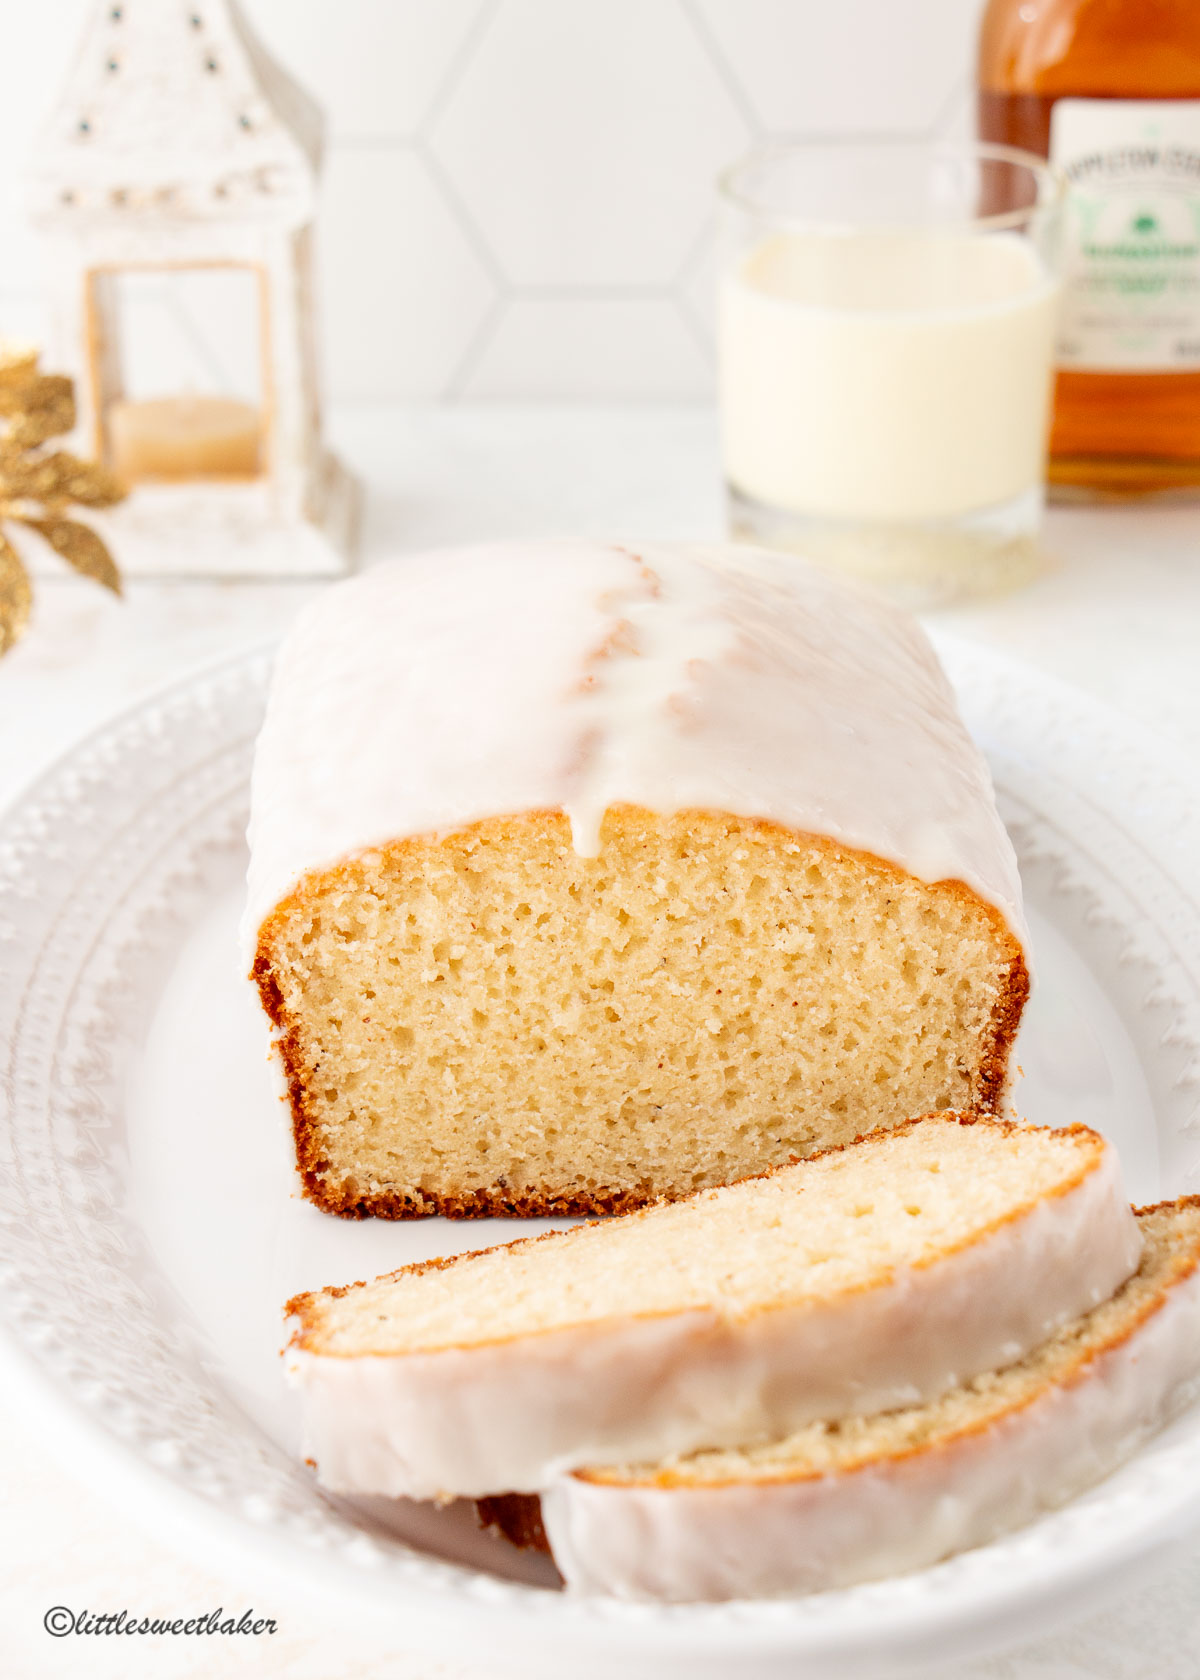 A loaf of eggnog bread with rum glaze on a white serving plate